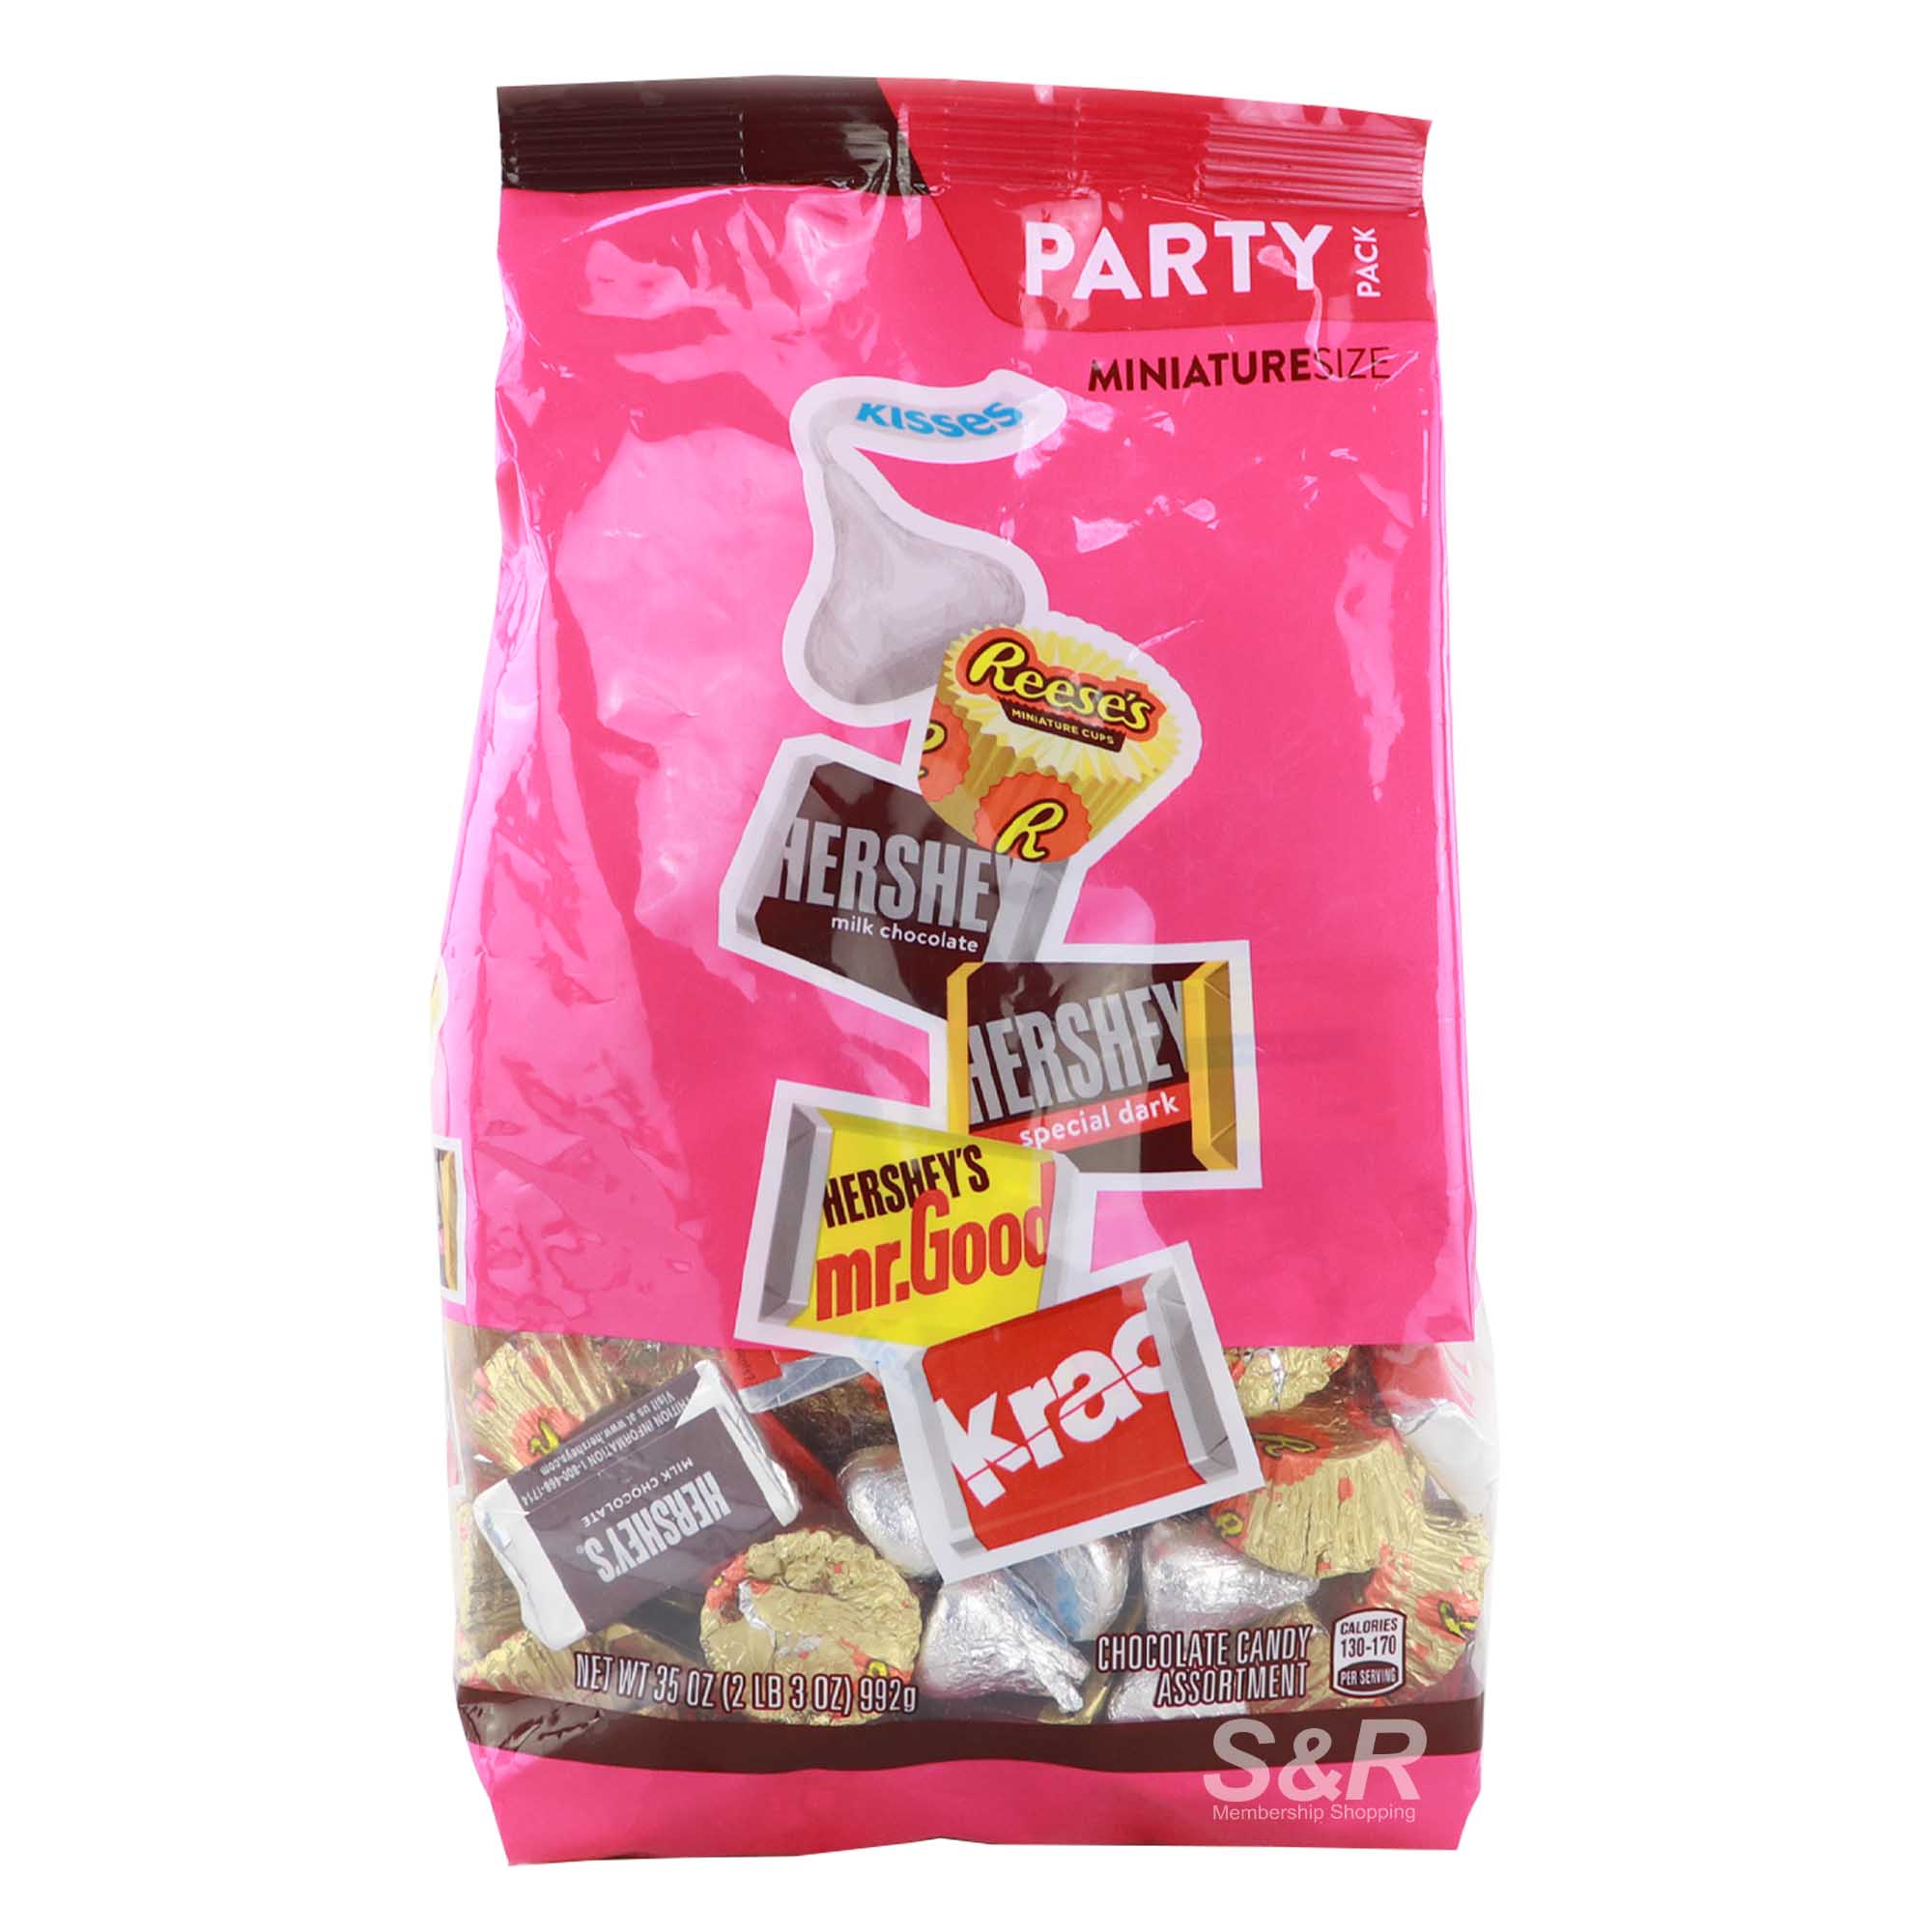 Hershey's Miniature Size Chocolate Candy Assortment Party Pack 992g